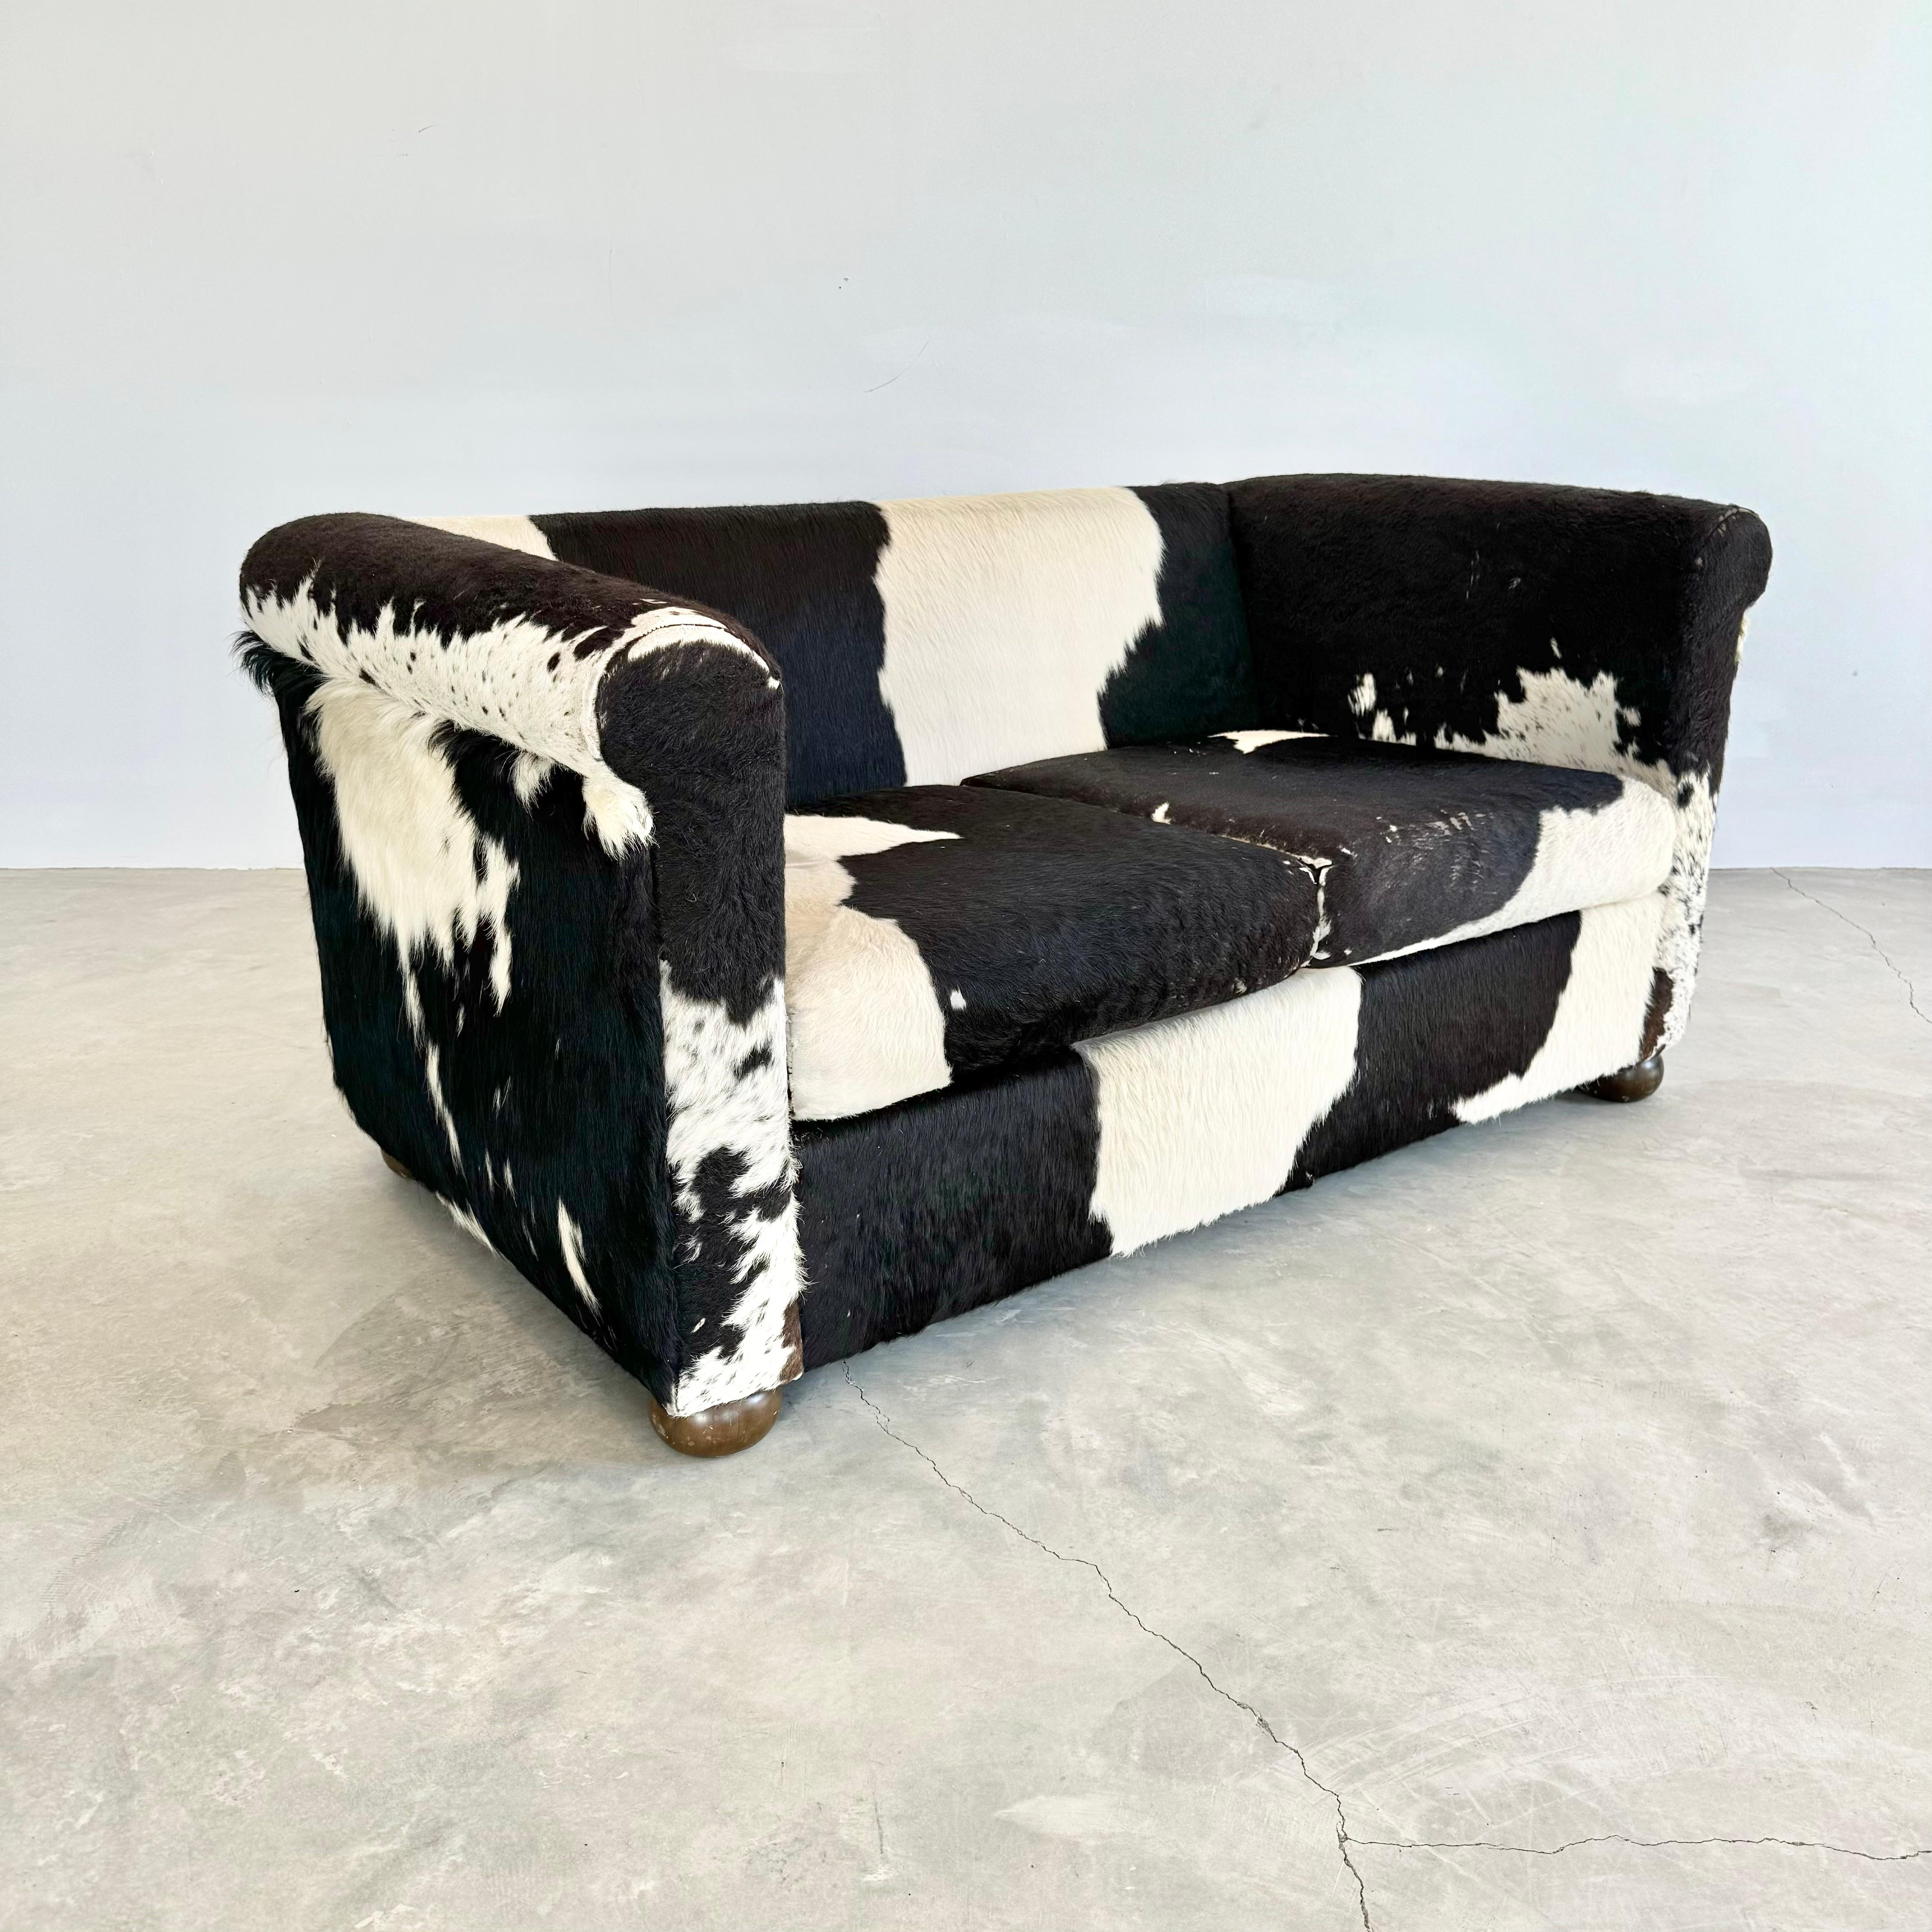 Incredible 2 seat cowhide sofa in black and white. Great coloring and contrast within the sofa as well as fluctuations in the nap and length of the hair with some sections being more worn in and others being longer and shaggy. Very comfortable and